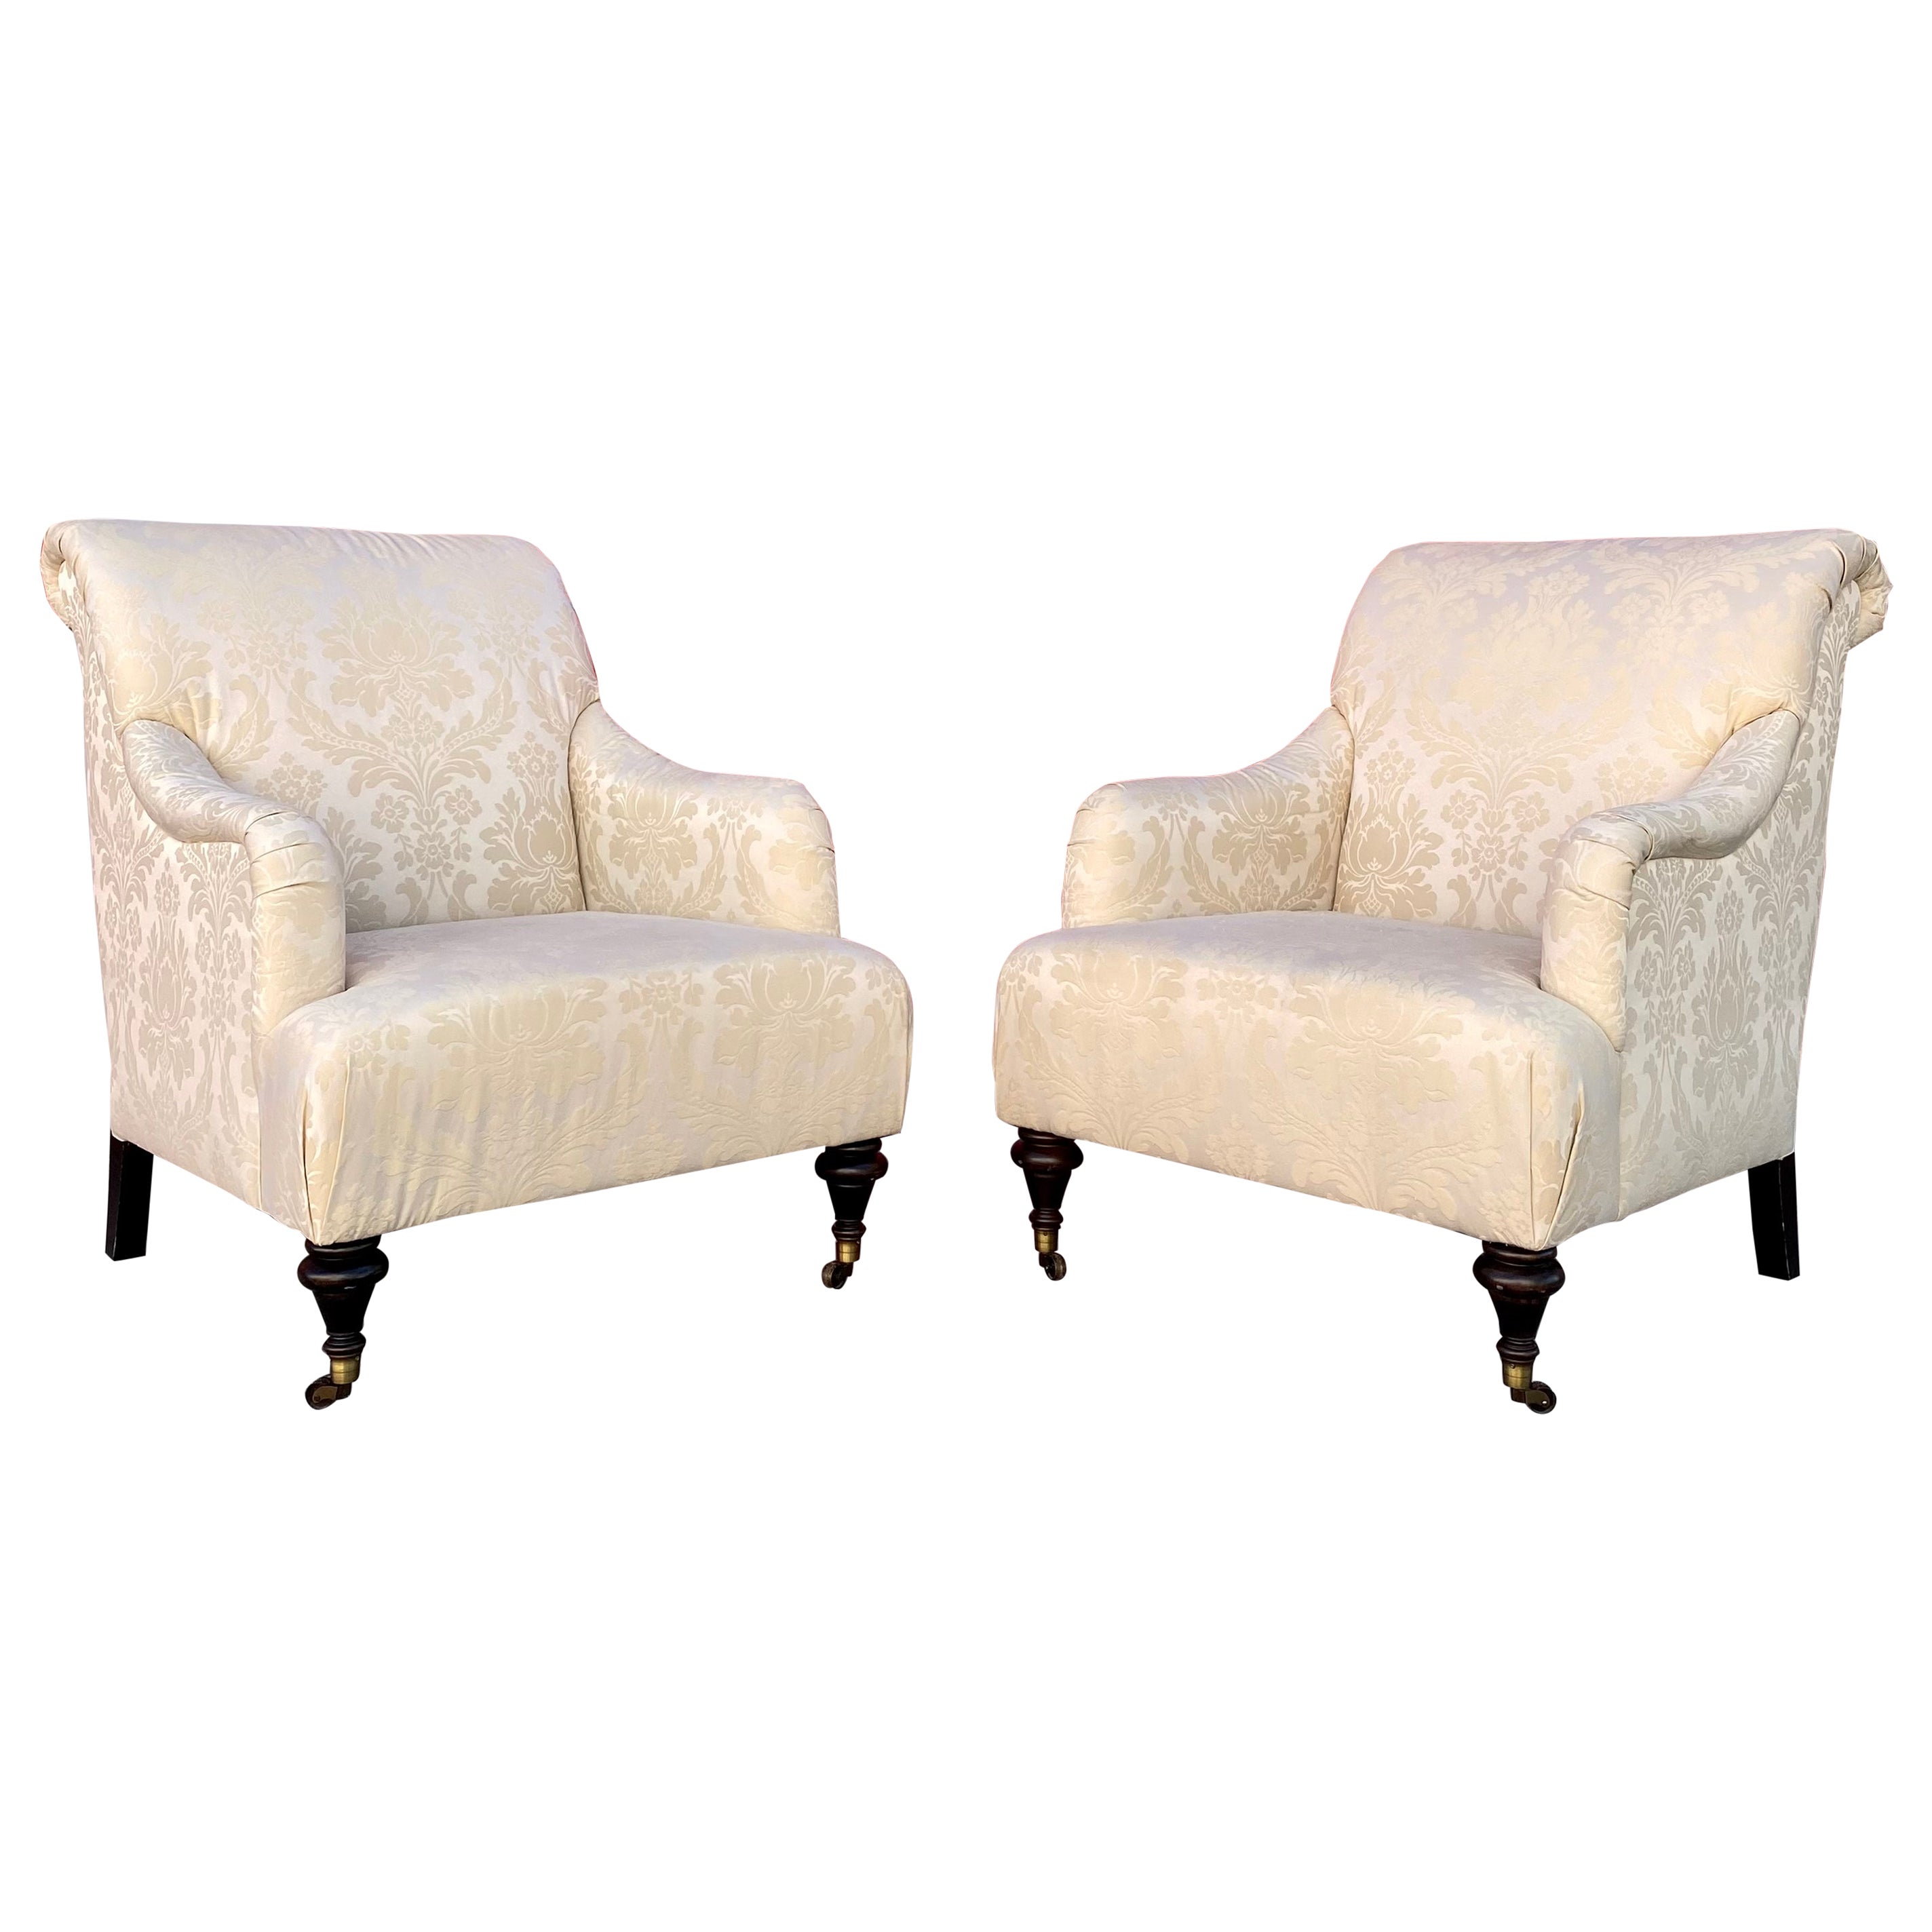 Thomasville English Light Beige Damask Silk Chairs on Castors, Set of 2 For Sale